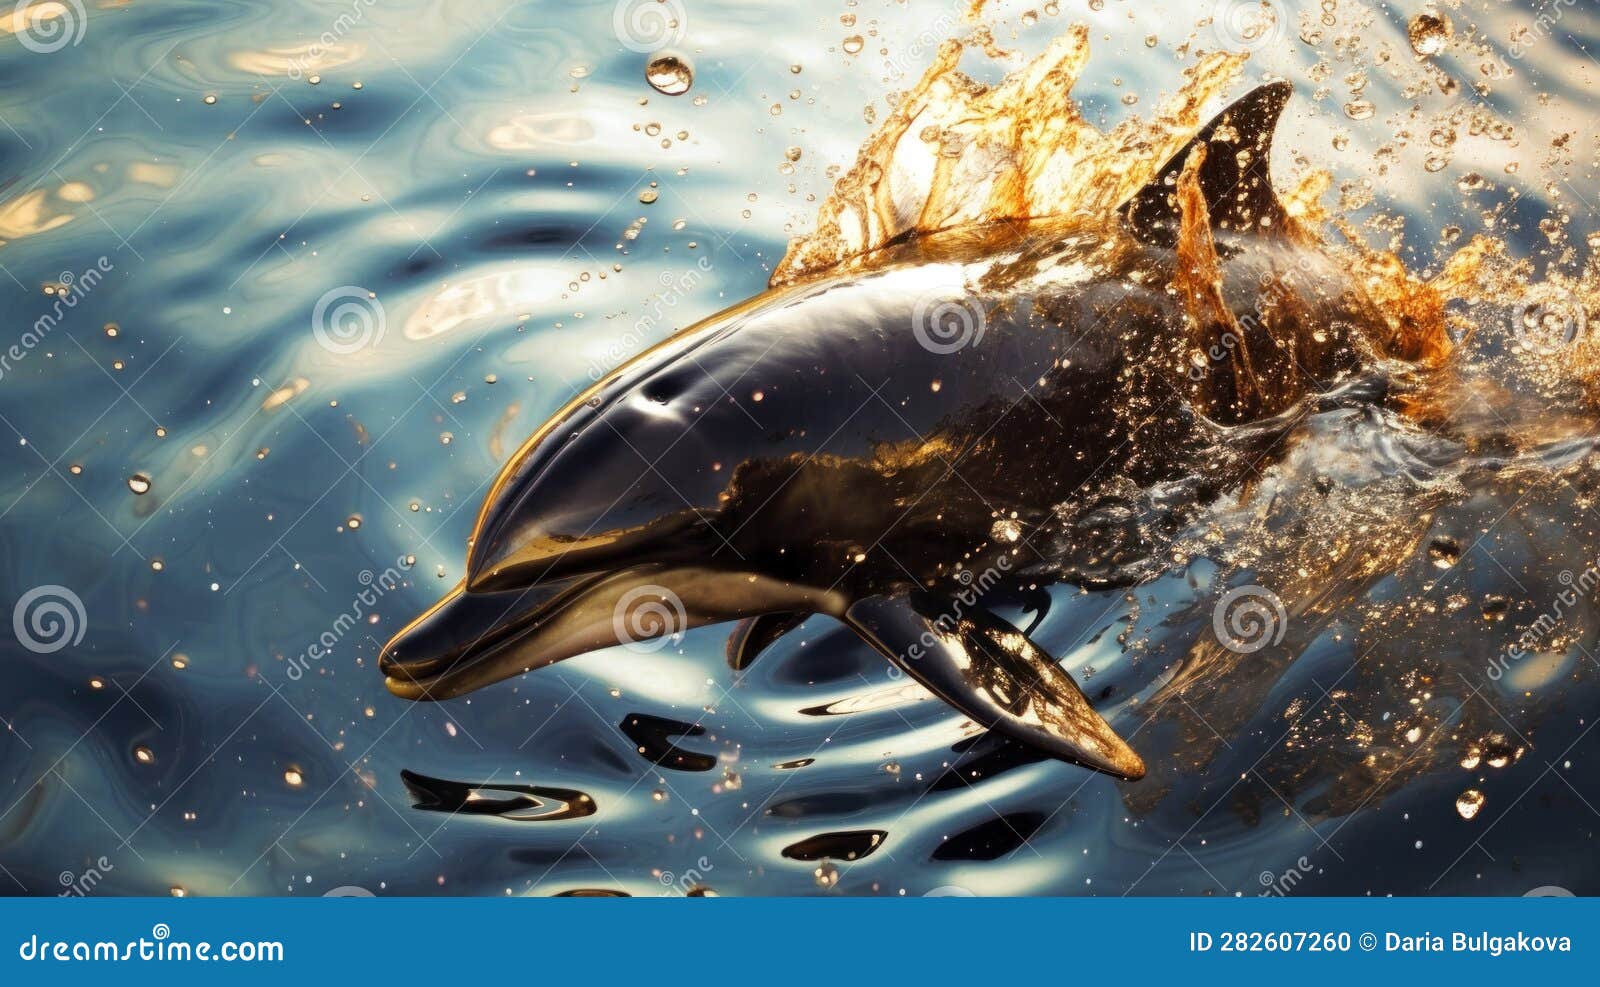 dolphin suffering from water pollution by oil. mammals come into contact with oil slicks while swimming or breathing near the